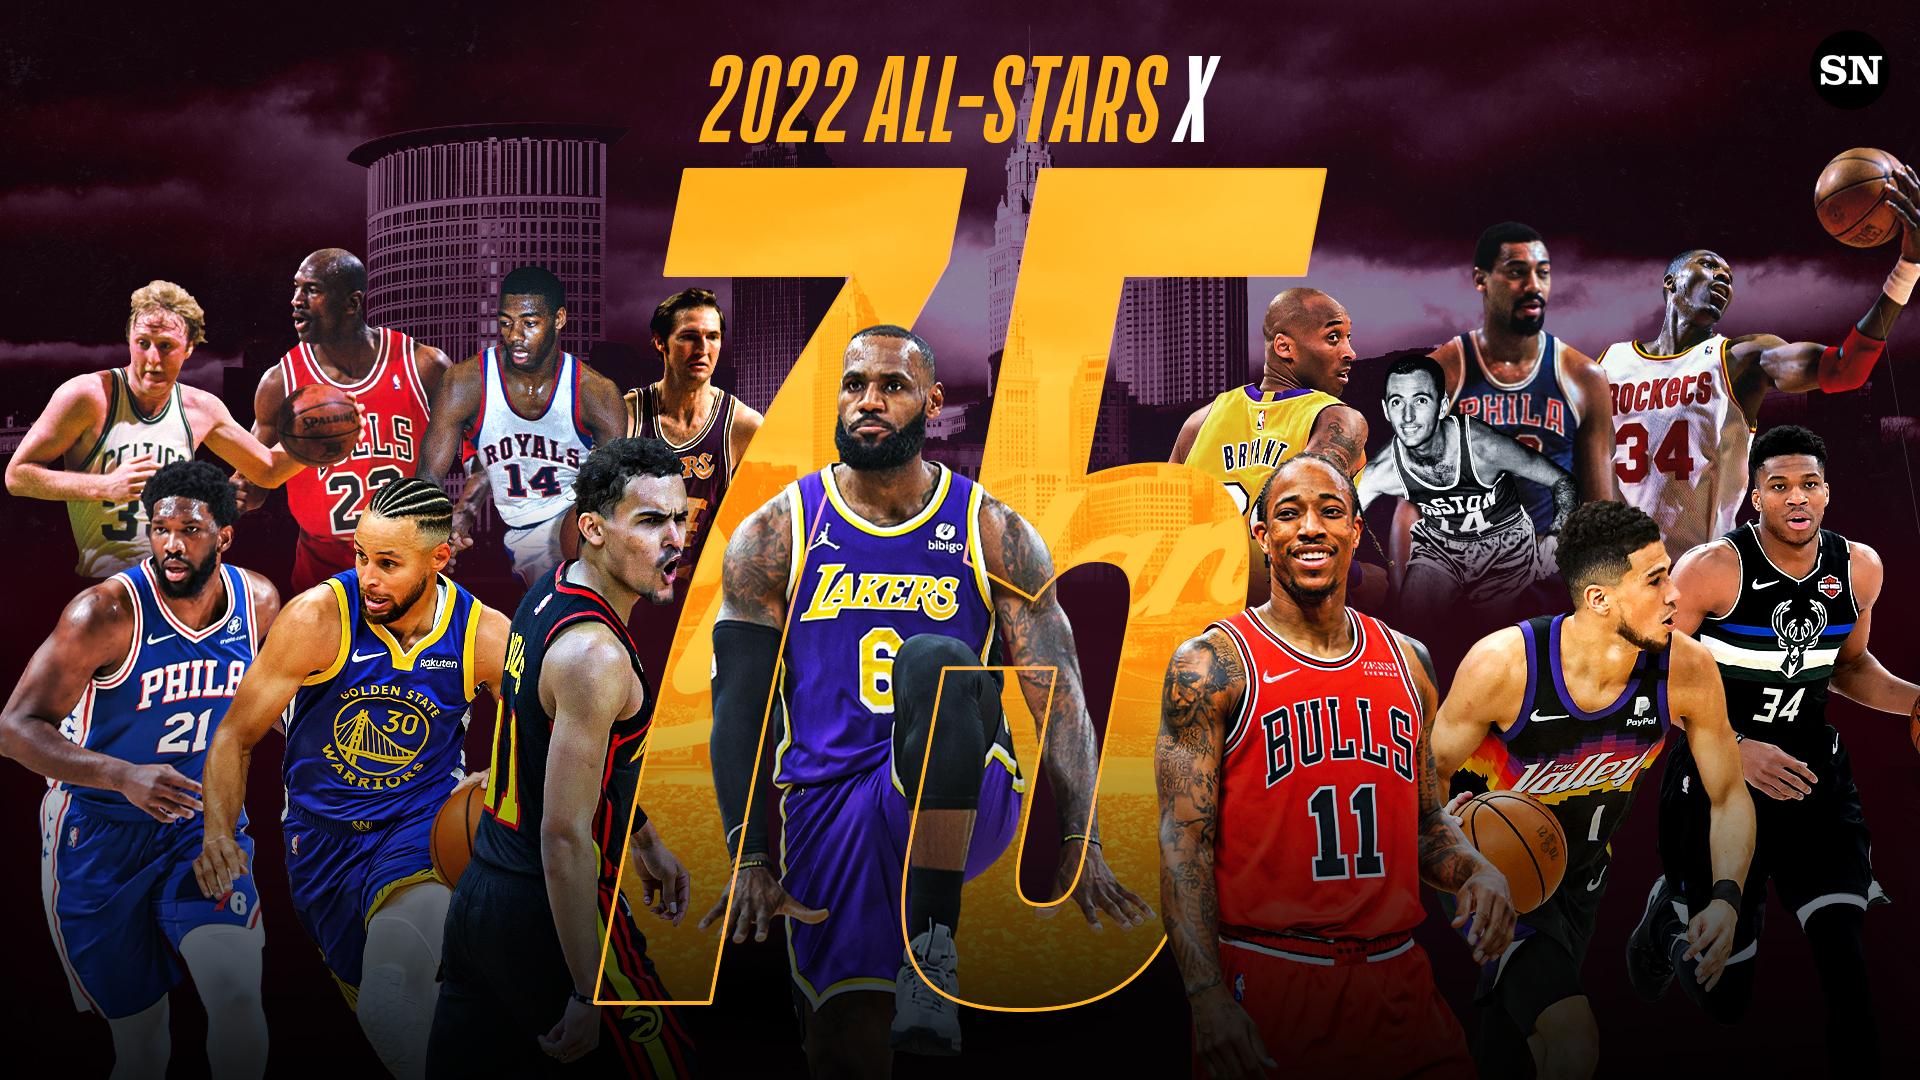 NBA All-Star Game 2022: Date, time, rosters, schedule, TV channel, live stream, how to watch - The Athletic - NBA